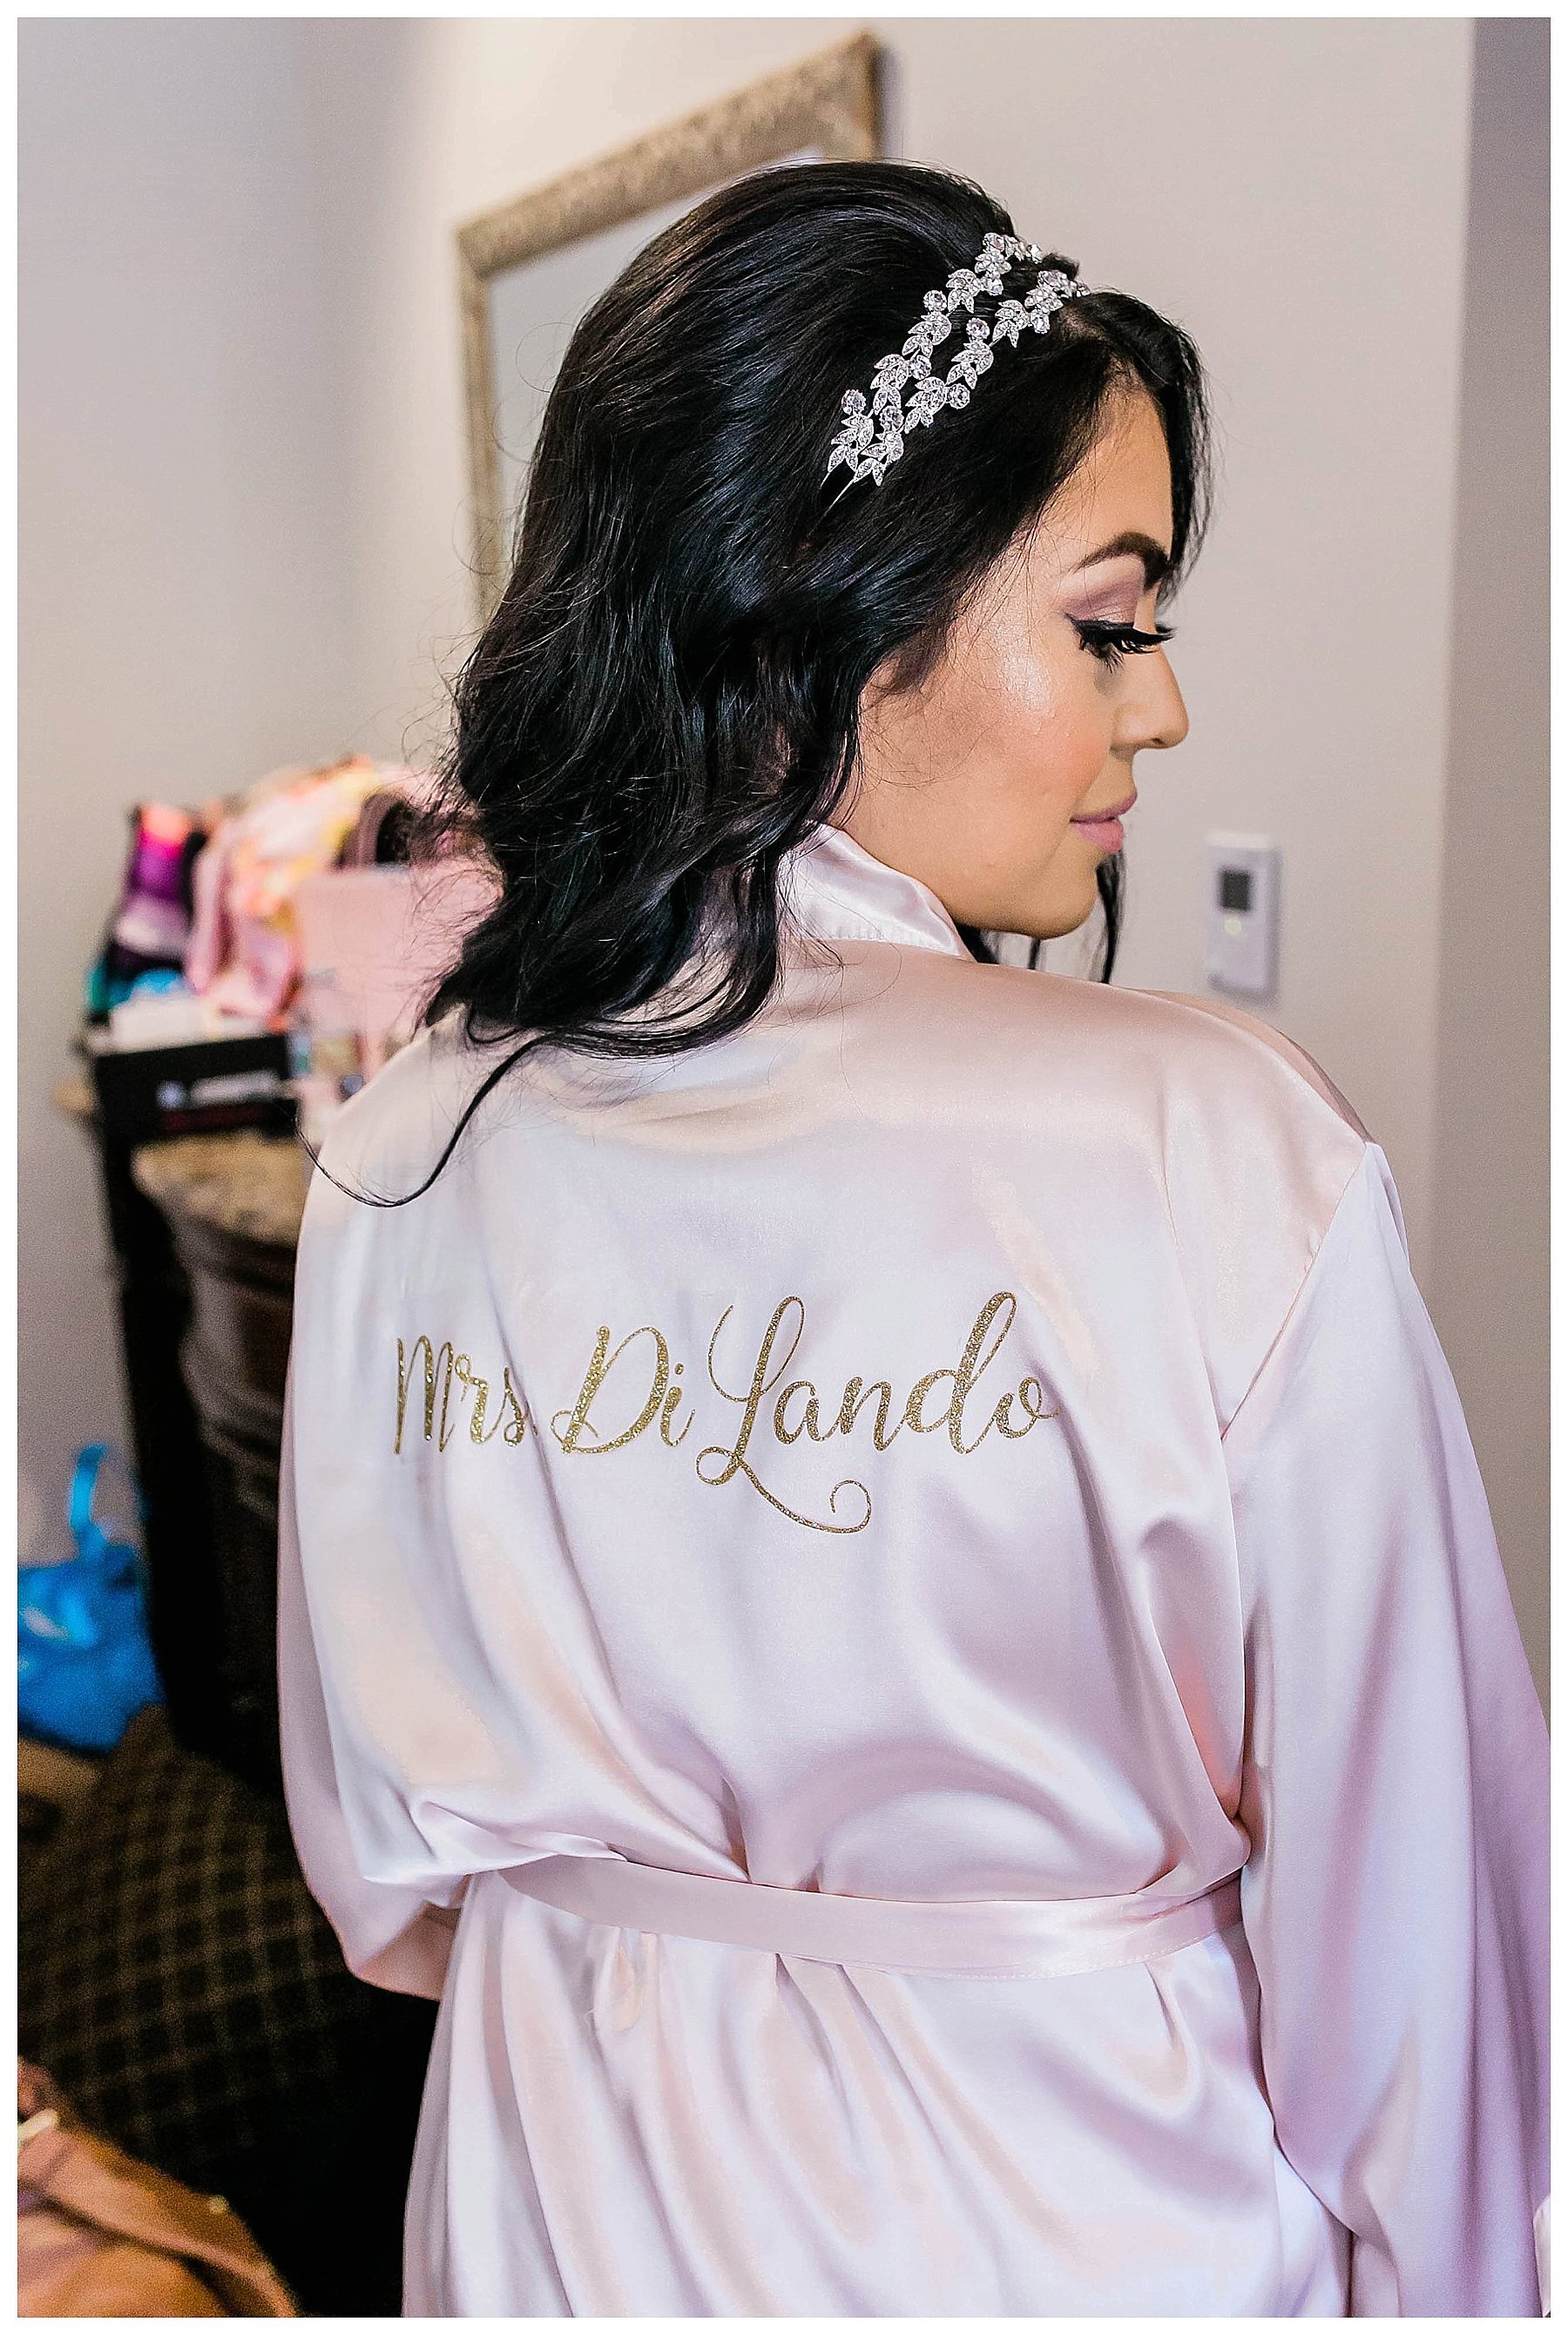  back of bride’s robe says mrs diLando and she is looking over her shoulder  